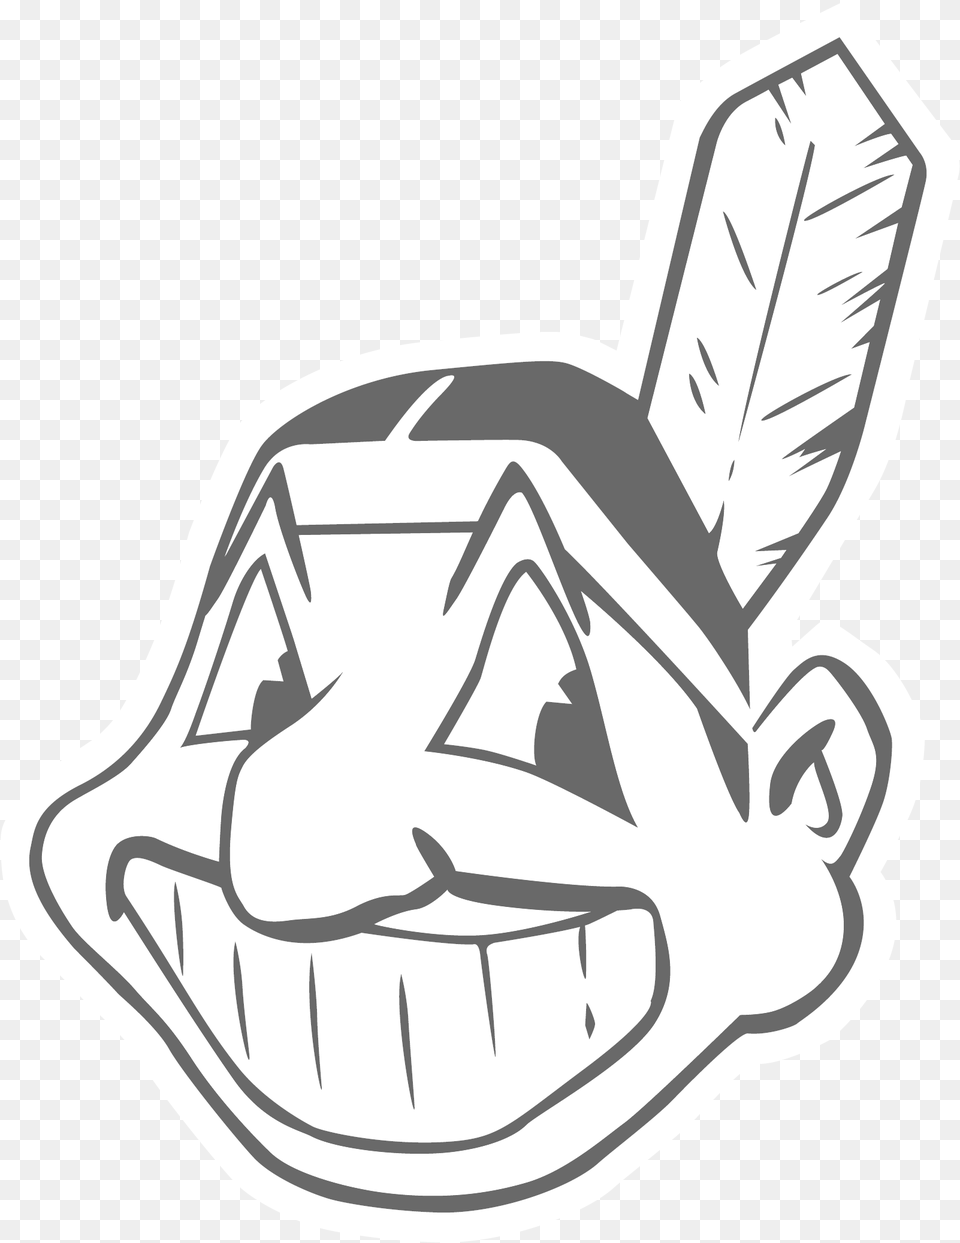 American Indian Cleveland Indians Mascots Chief Wahoo, Art, Drawing, Ammunition, Grenade Png Image